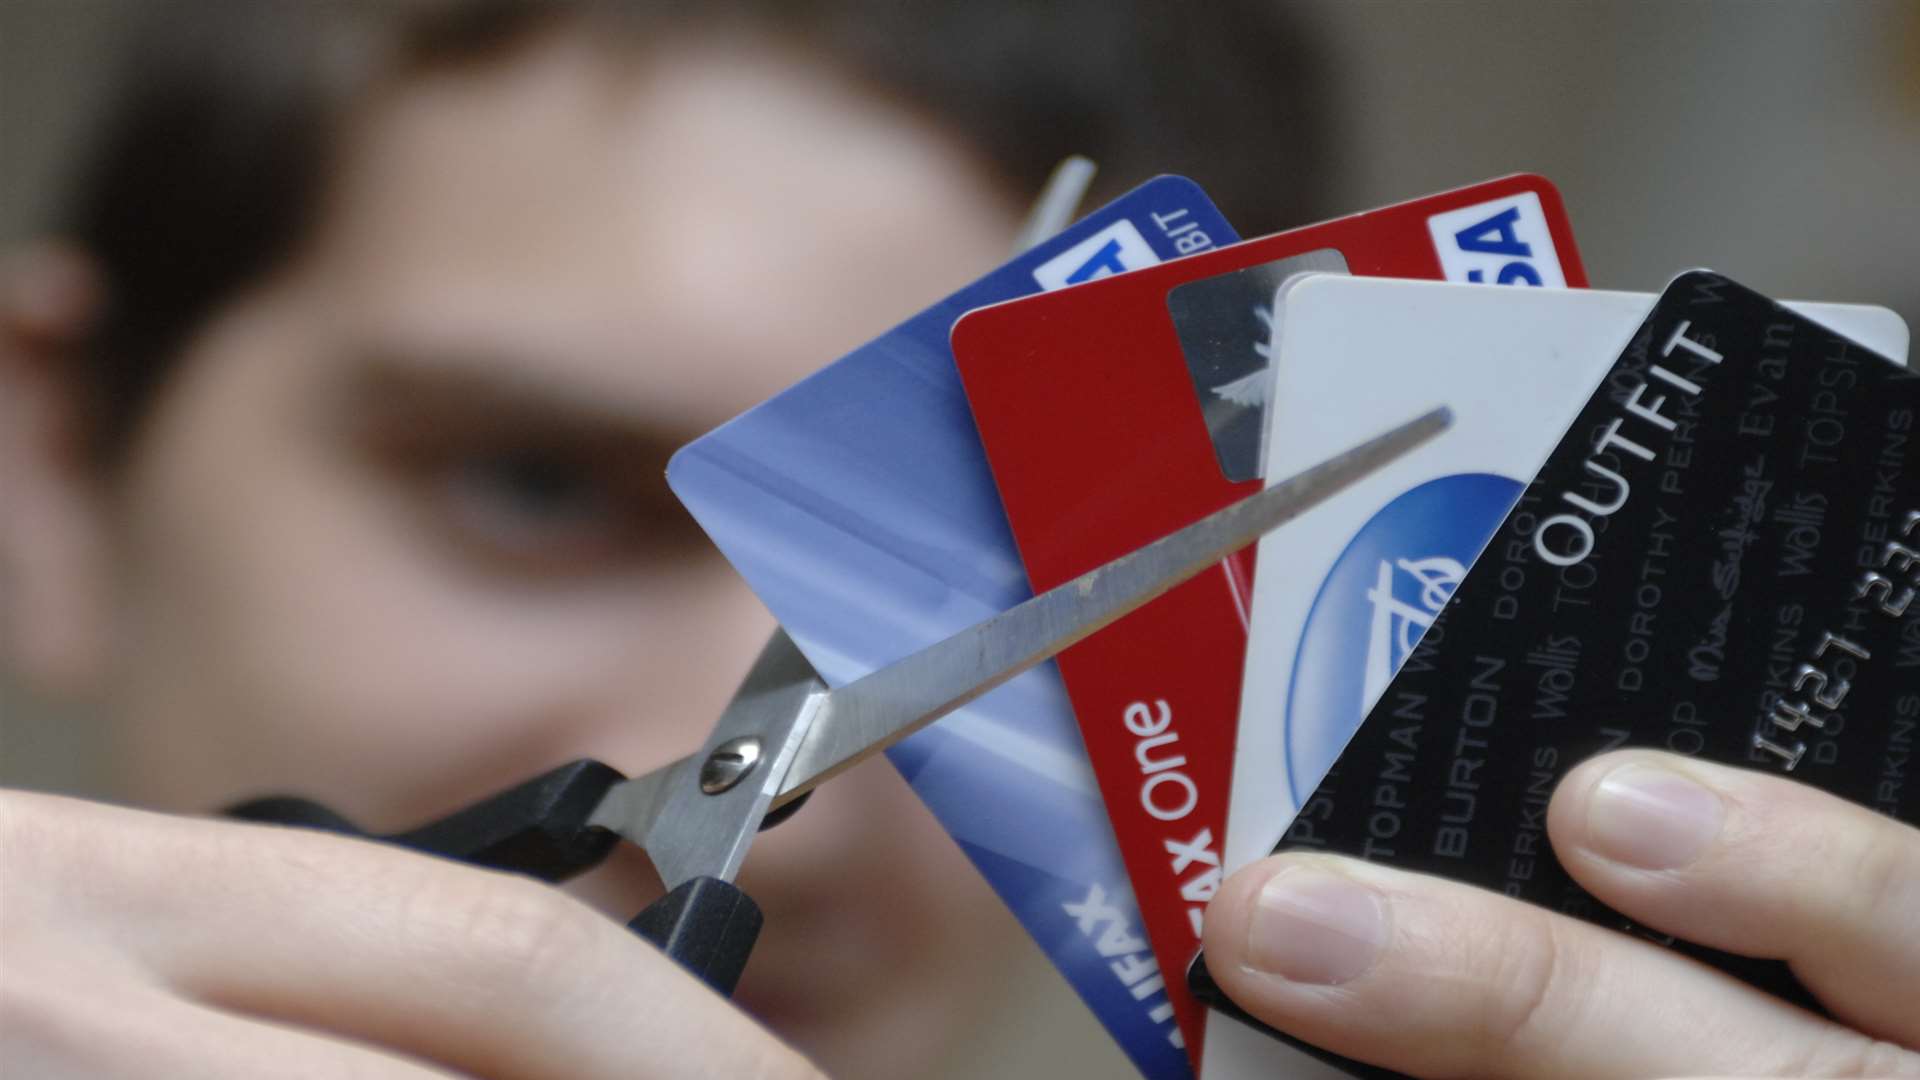 Cutting up credit cards: stock picture